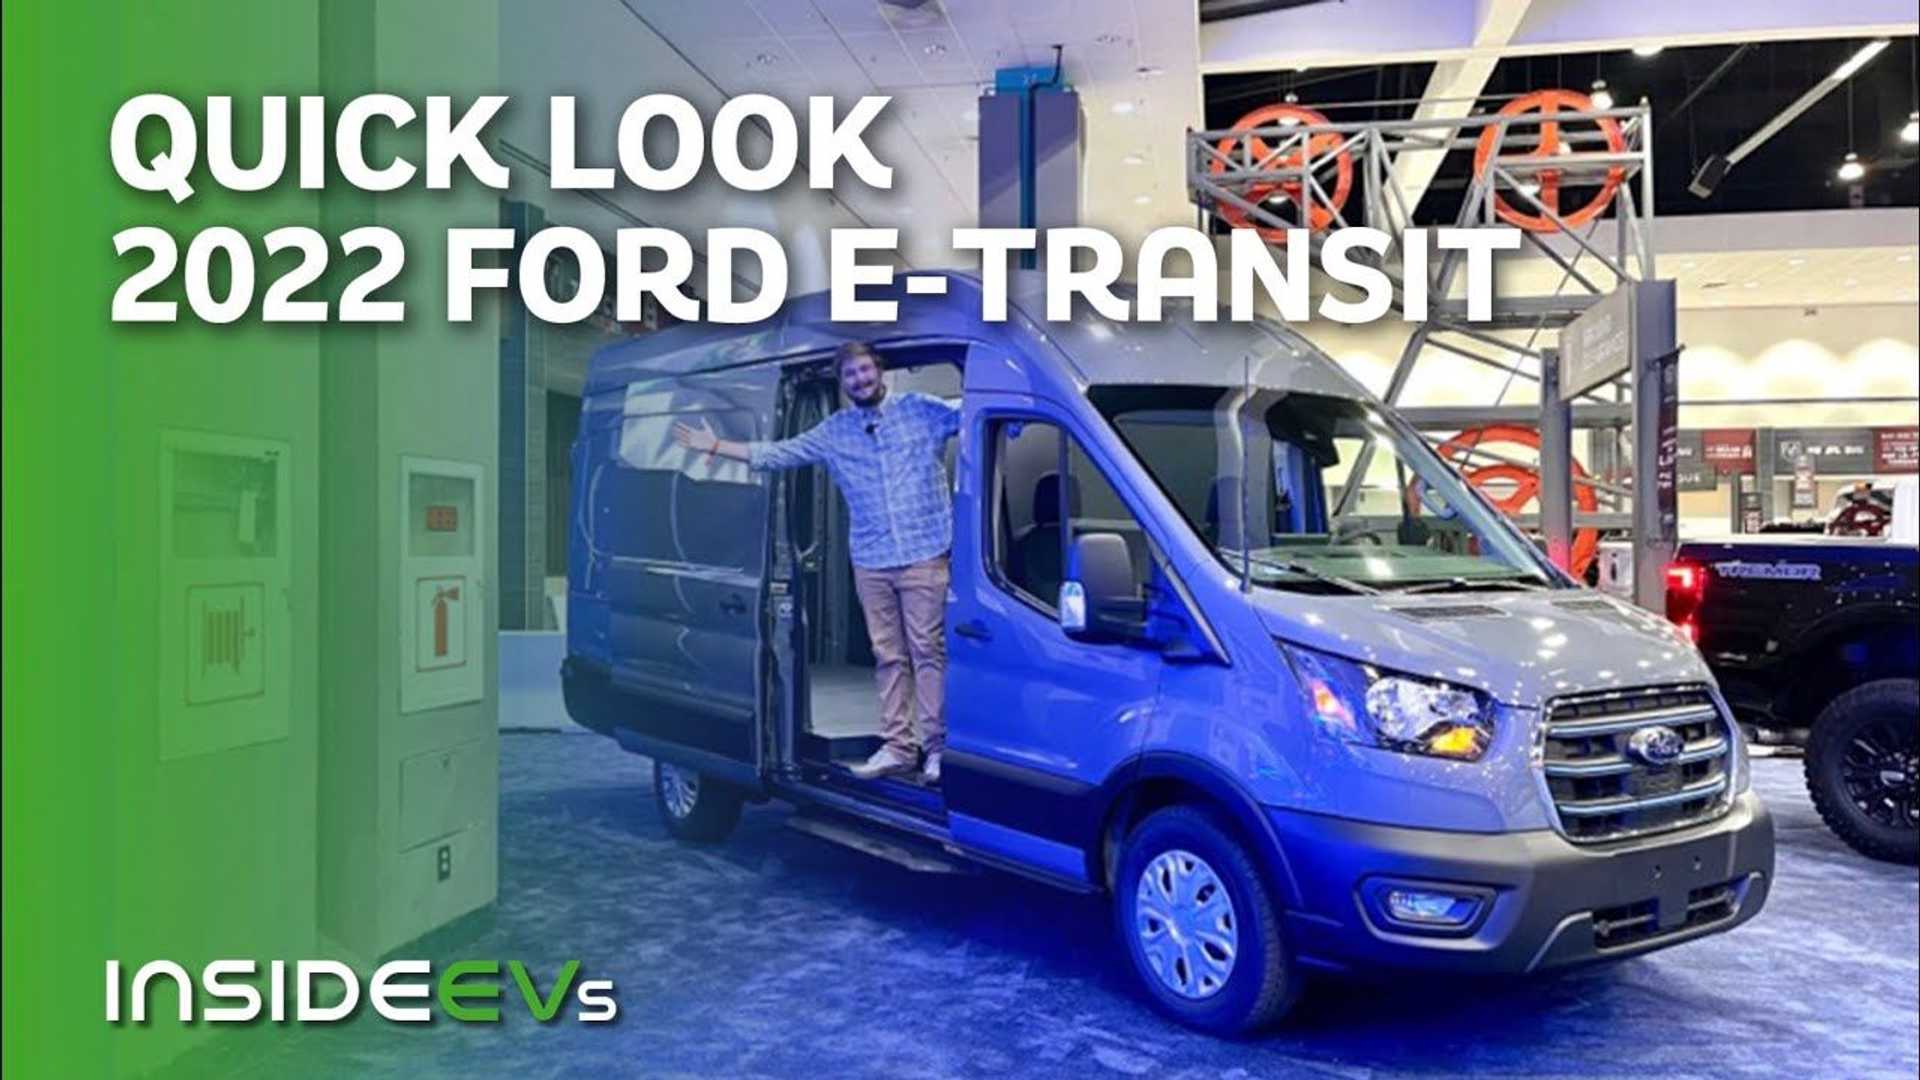 First Look At The 2022 Ford E-Transit ...